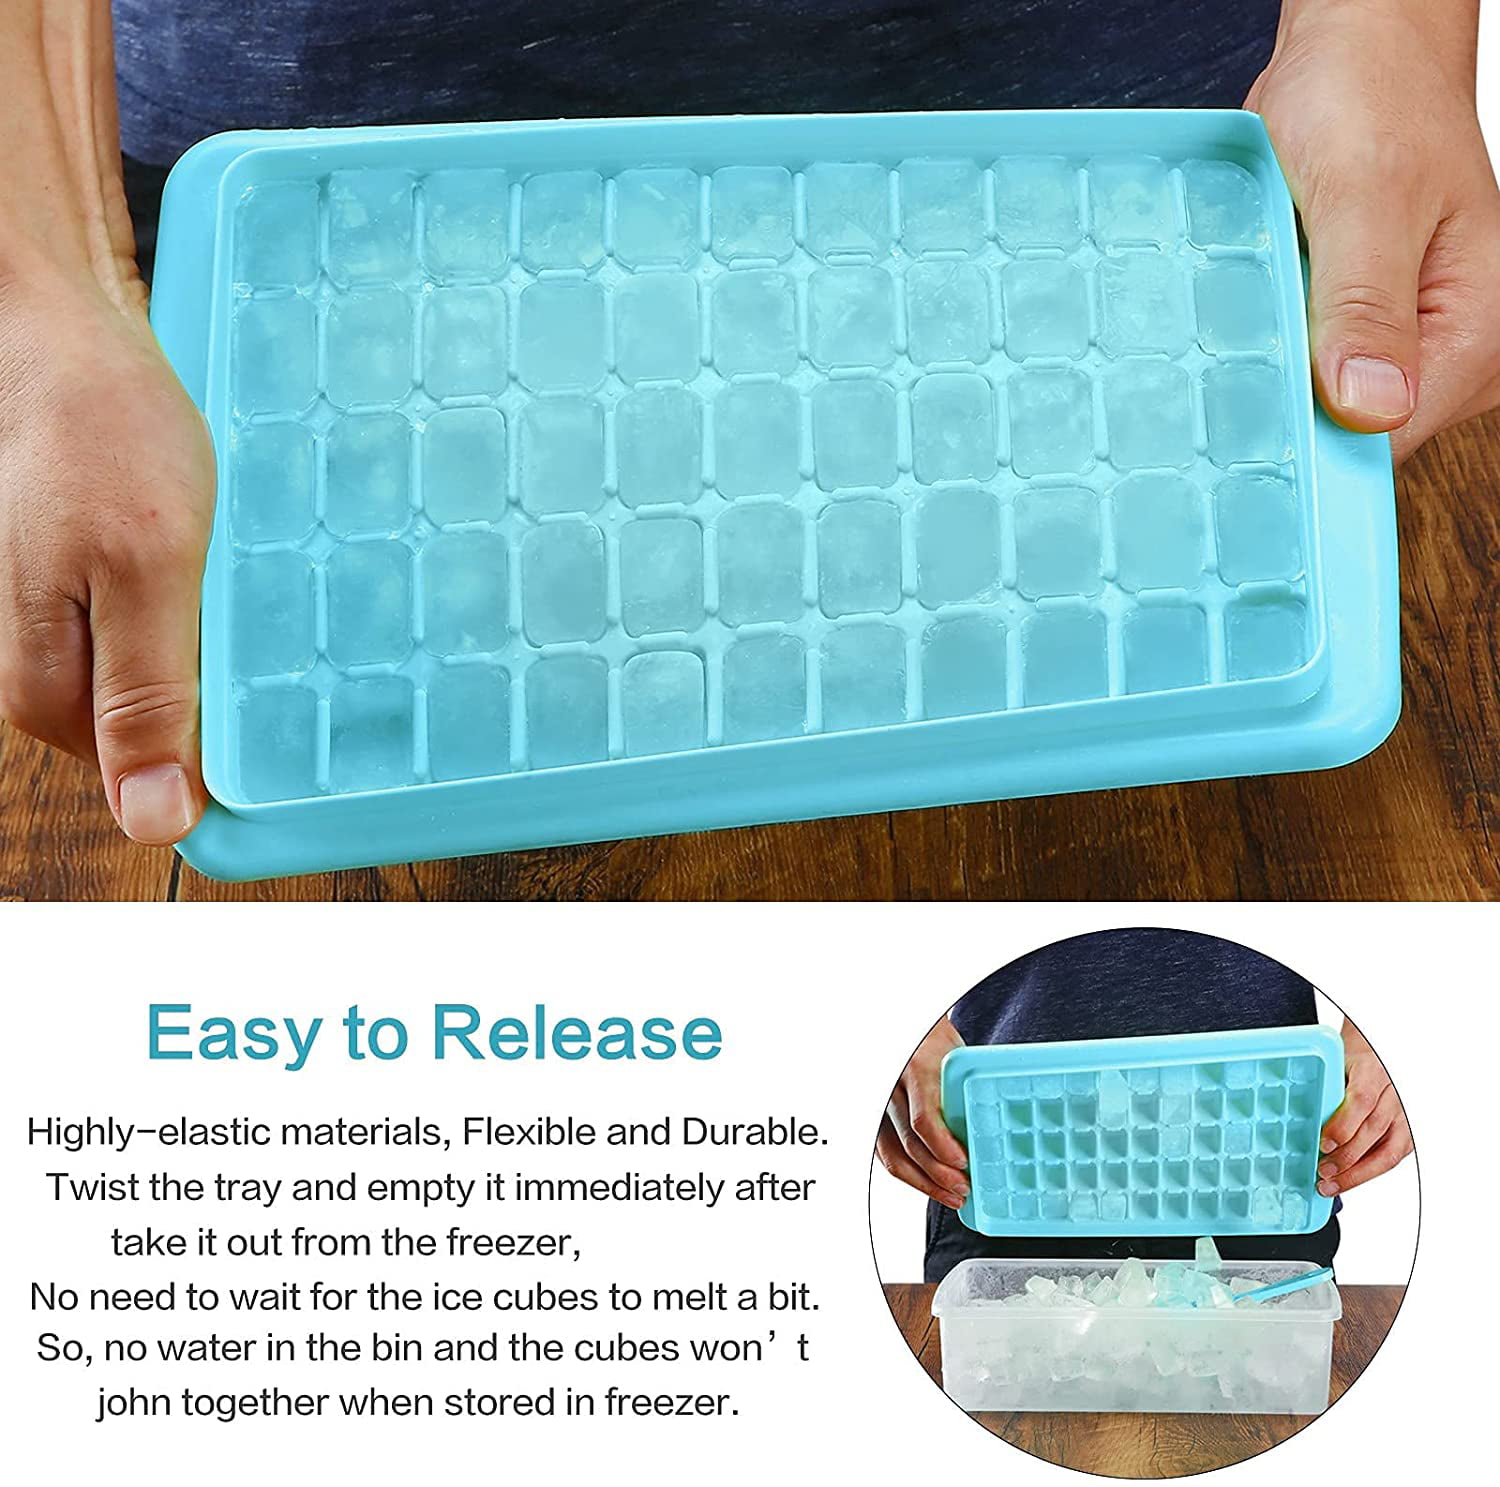 LUATSDAR Ice Cube Trays with Lid and Ice Storage Bin, 3-Pack (72 Pcs 1 Inch  Small Ice Cubes) Flexible Easy-Release Silicone Ice Cube Molds, Reusable